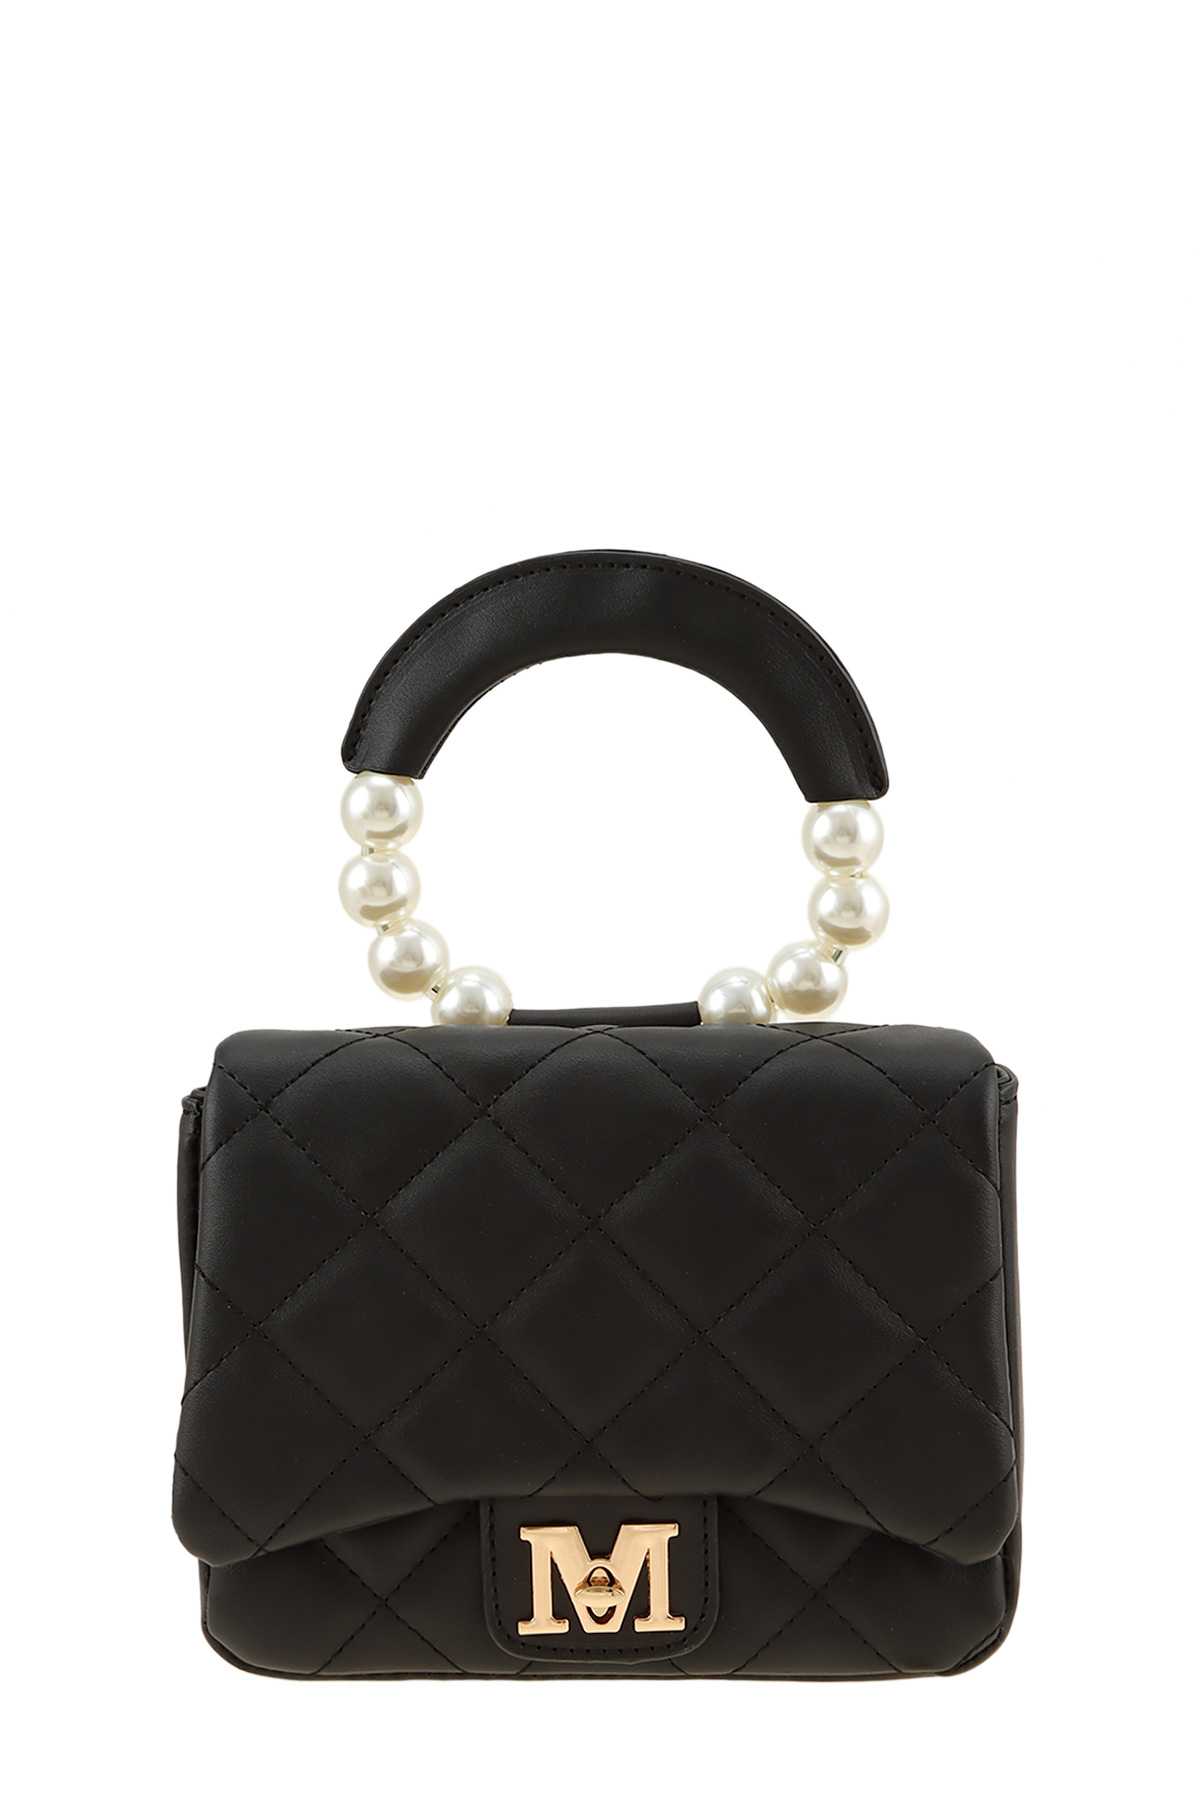 Diamond Quilted Bag with M Accent and Pearl Handle